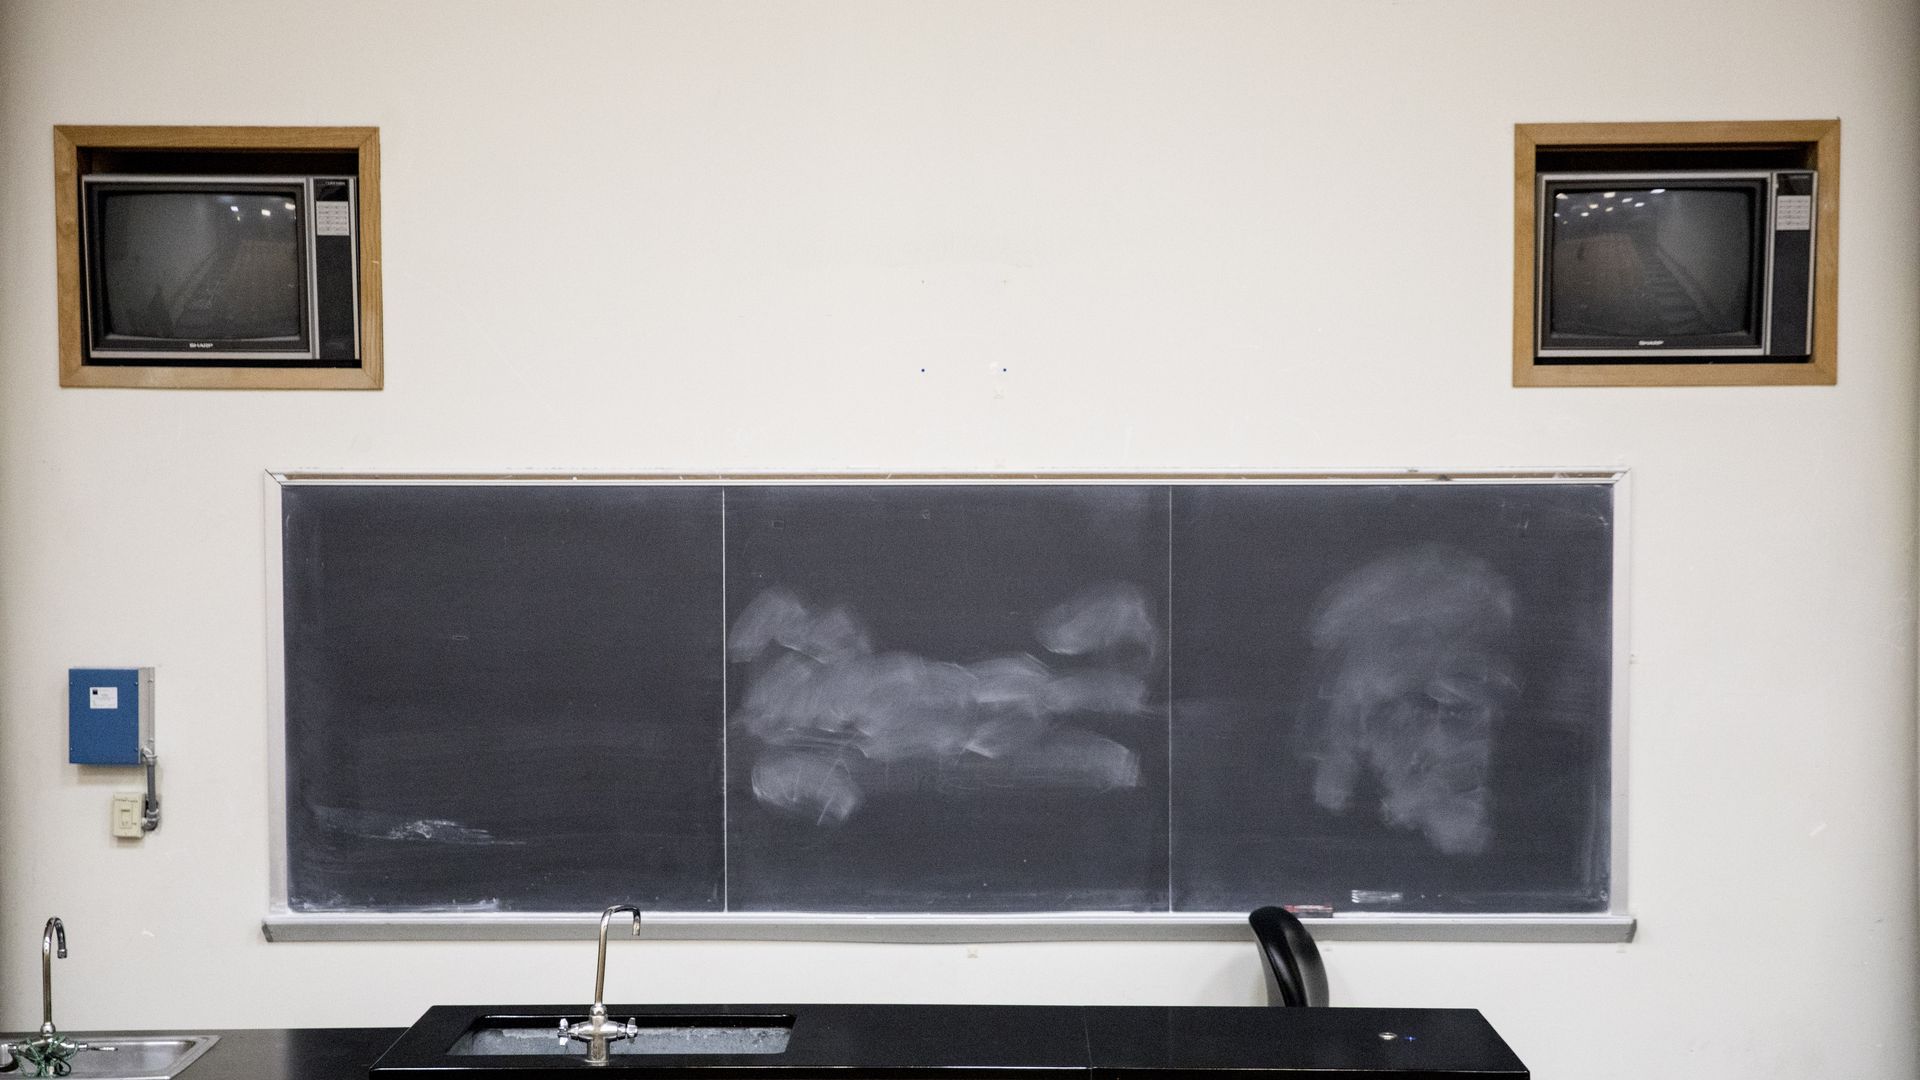 Two vintage television sets sit above a chalkboard inside a classroom.